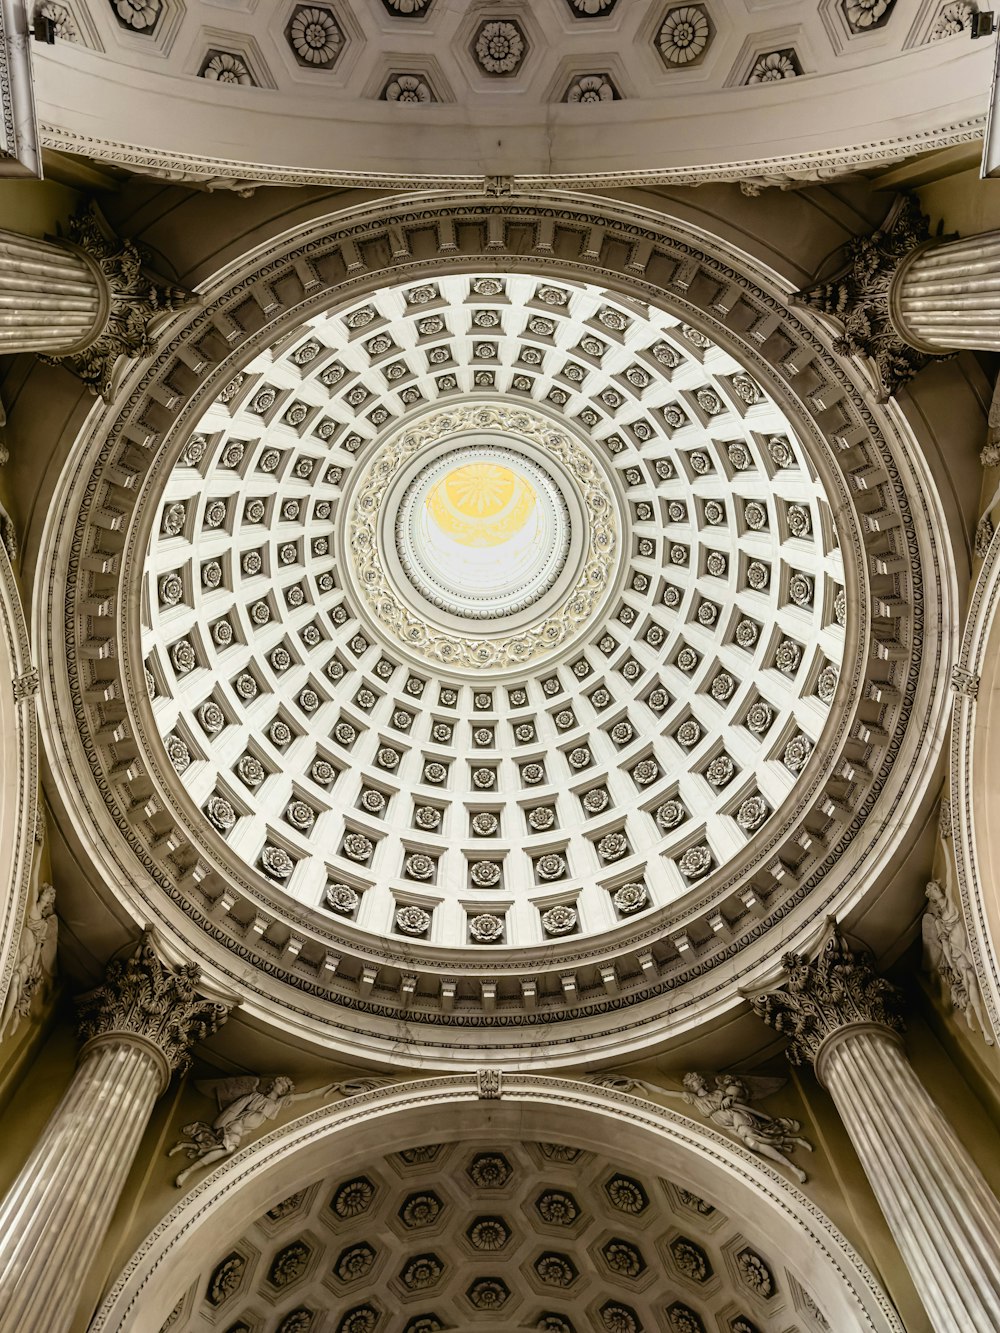 the ceiling of a building with columns and a dome